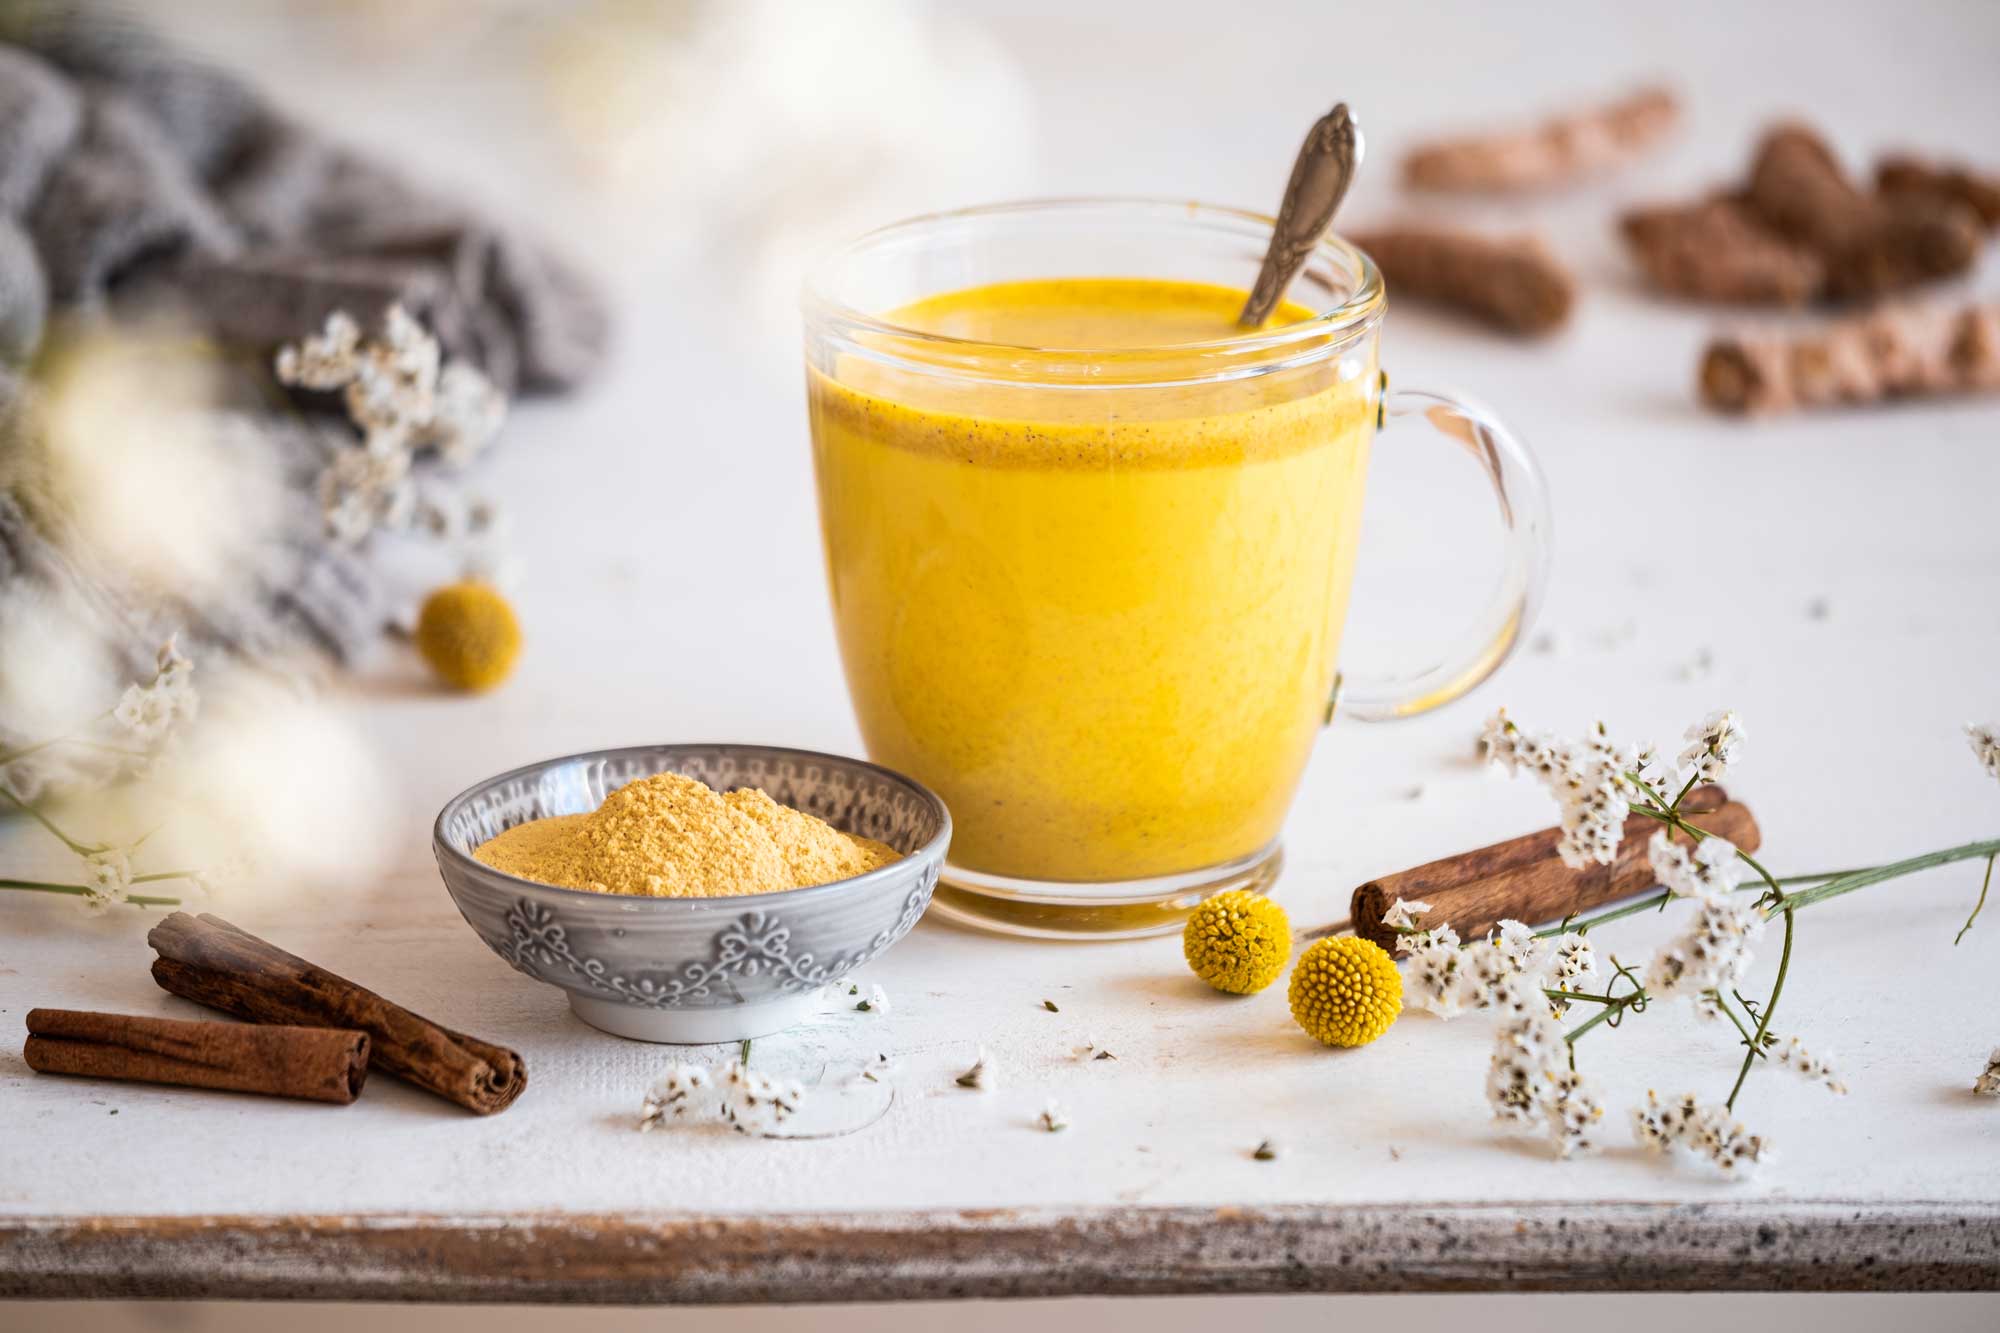 What are the effects of golden milk?